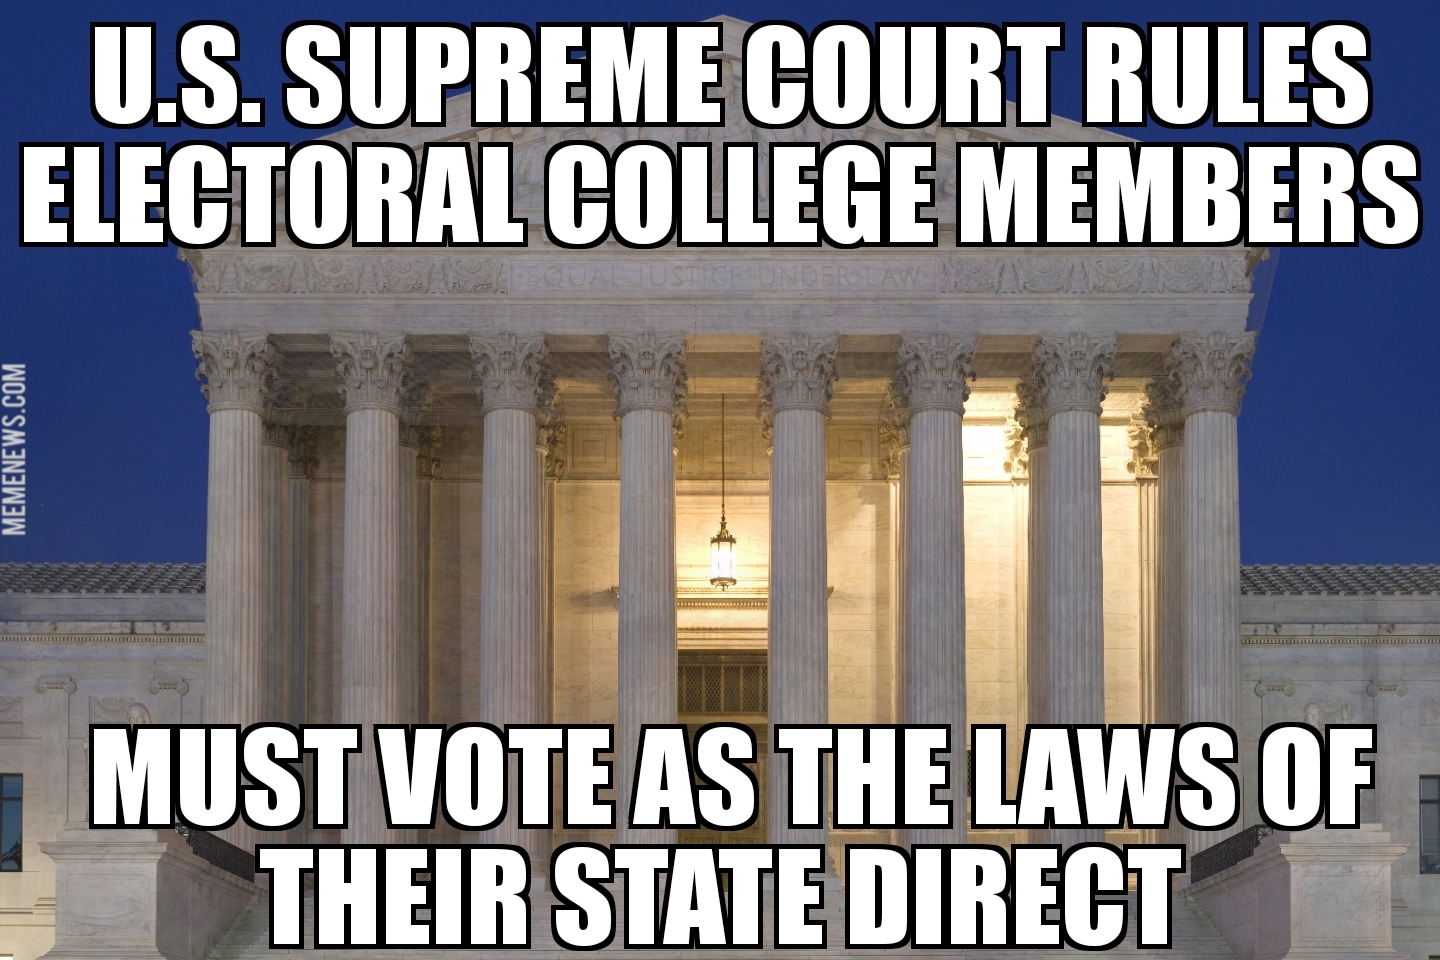 Supreme Court says electors must vote by state laws